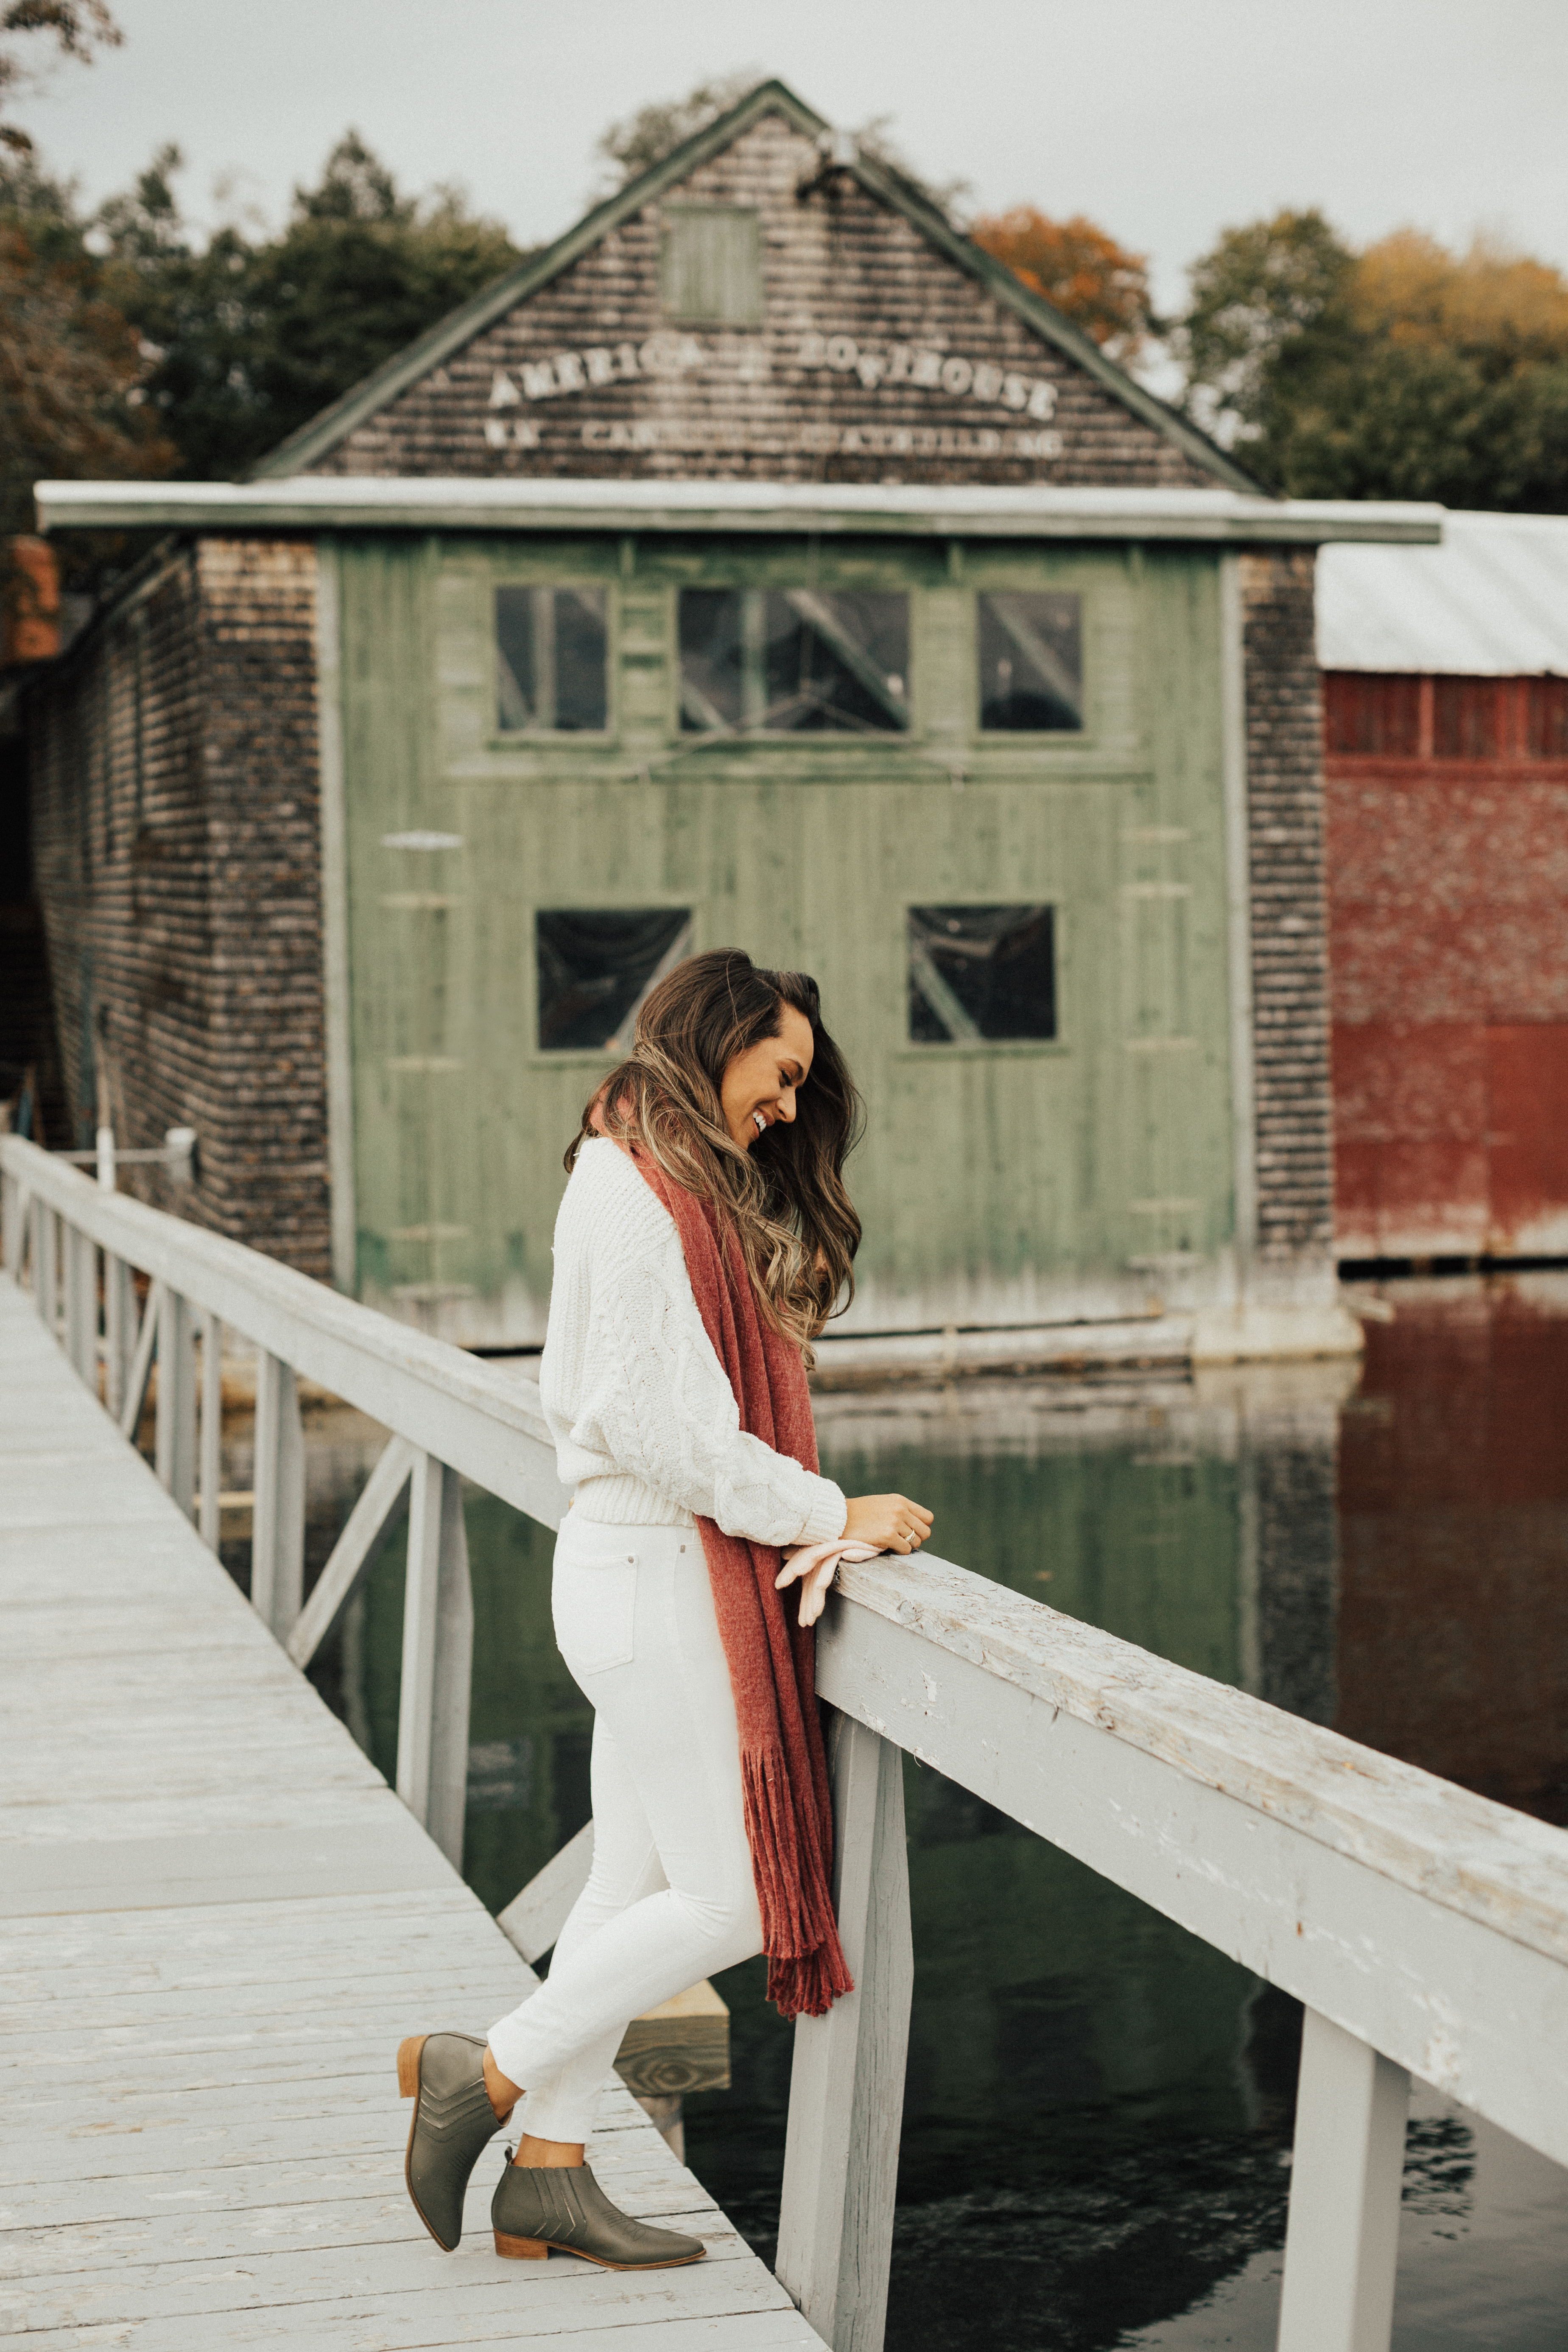 Featured On Anthropologie | White Anthropologie Sweater, Cozy Fall Scarf, Perfect White Jeans | Shades of Fall | Fall Fashion feature with Anthropologie | Fall Trends with Travel Blogger Elana Jadallah | Best Looks of Fall with Anthropologie | Exploring Camden Maine | Travel Diary Camden Maine via @elanaloo + elanaloo.com